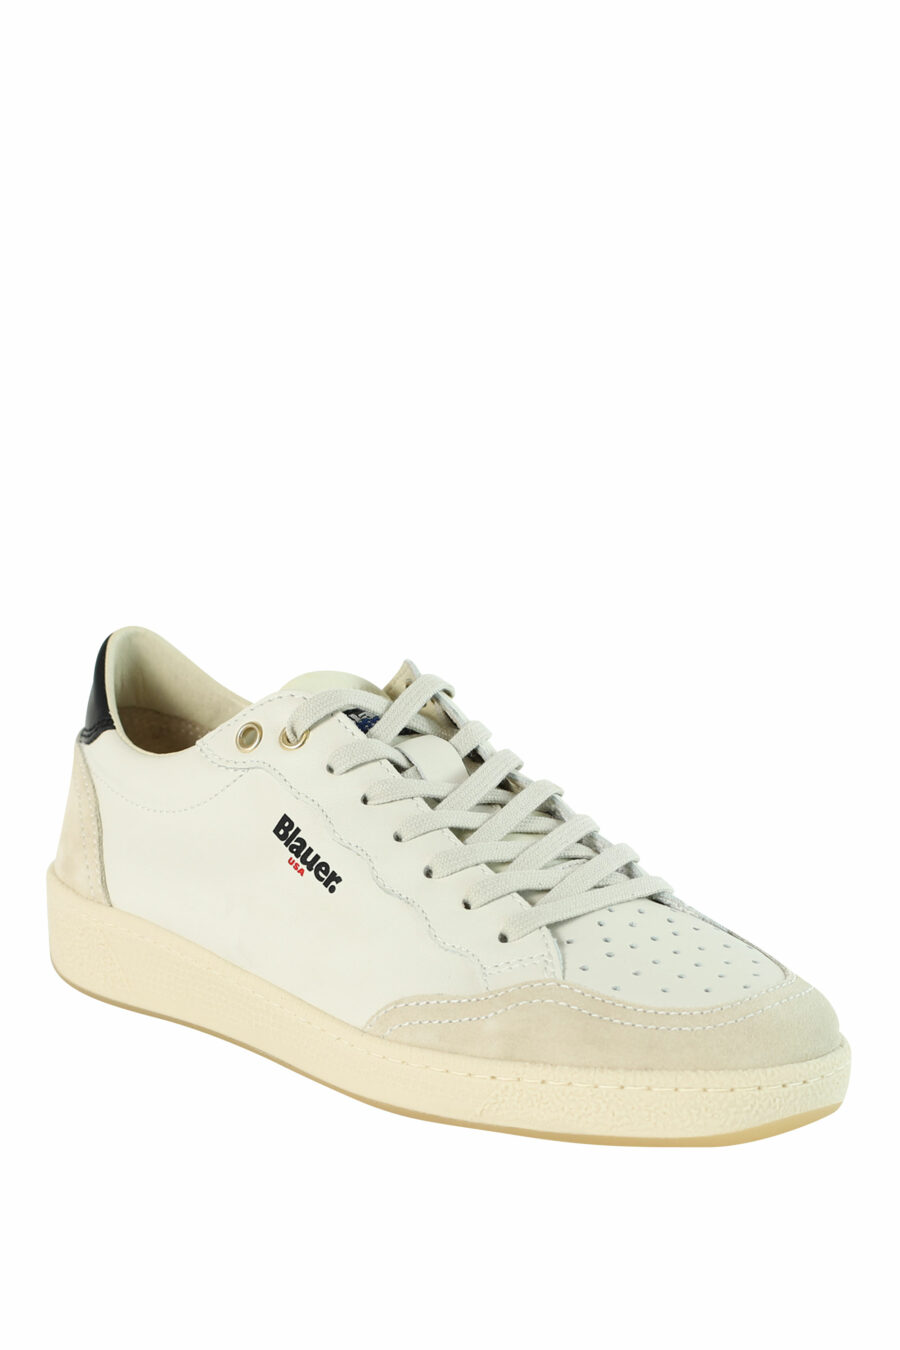 White "MURRAY" trainers with black details - 8058156497504 2